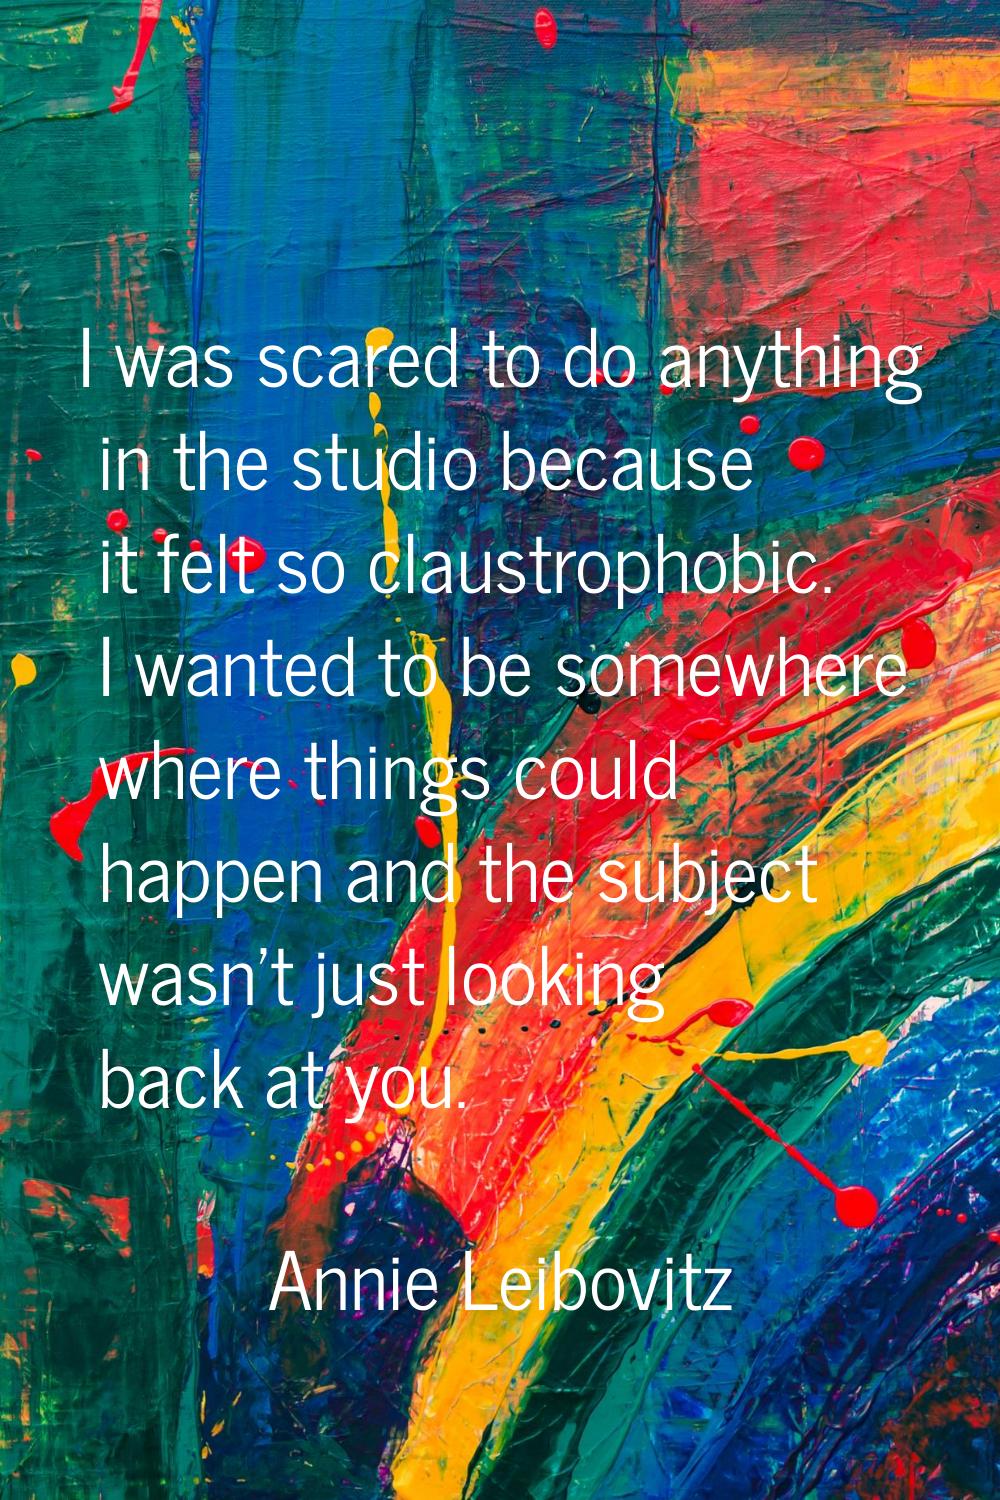 I was scared to do anything in the studio because it felt so claustrophobic. I wanted to be somewhe